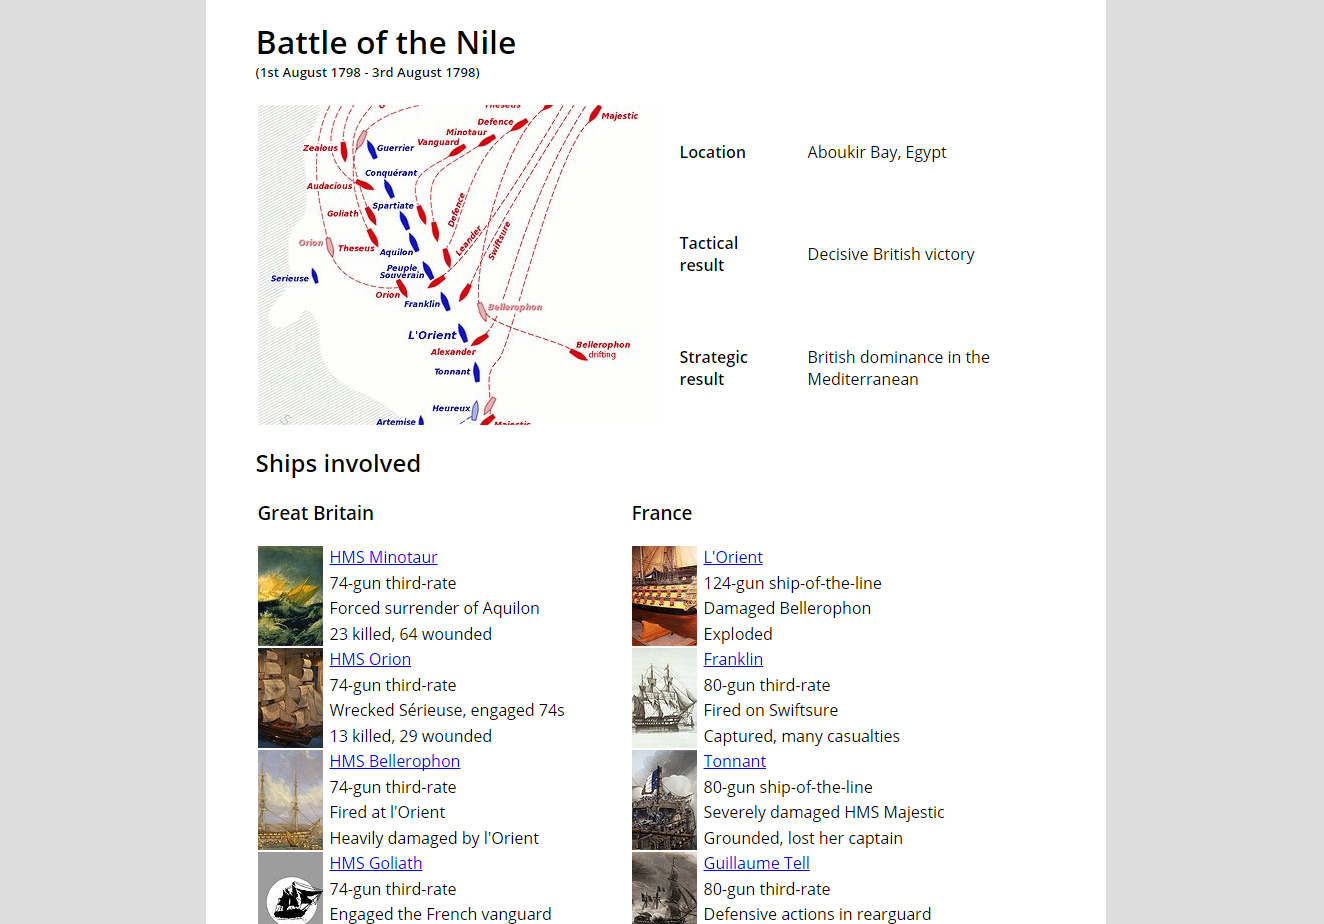 Battle of the Nile info page